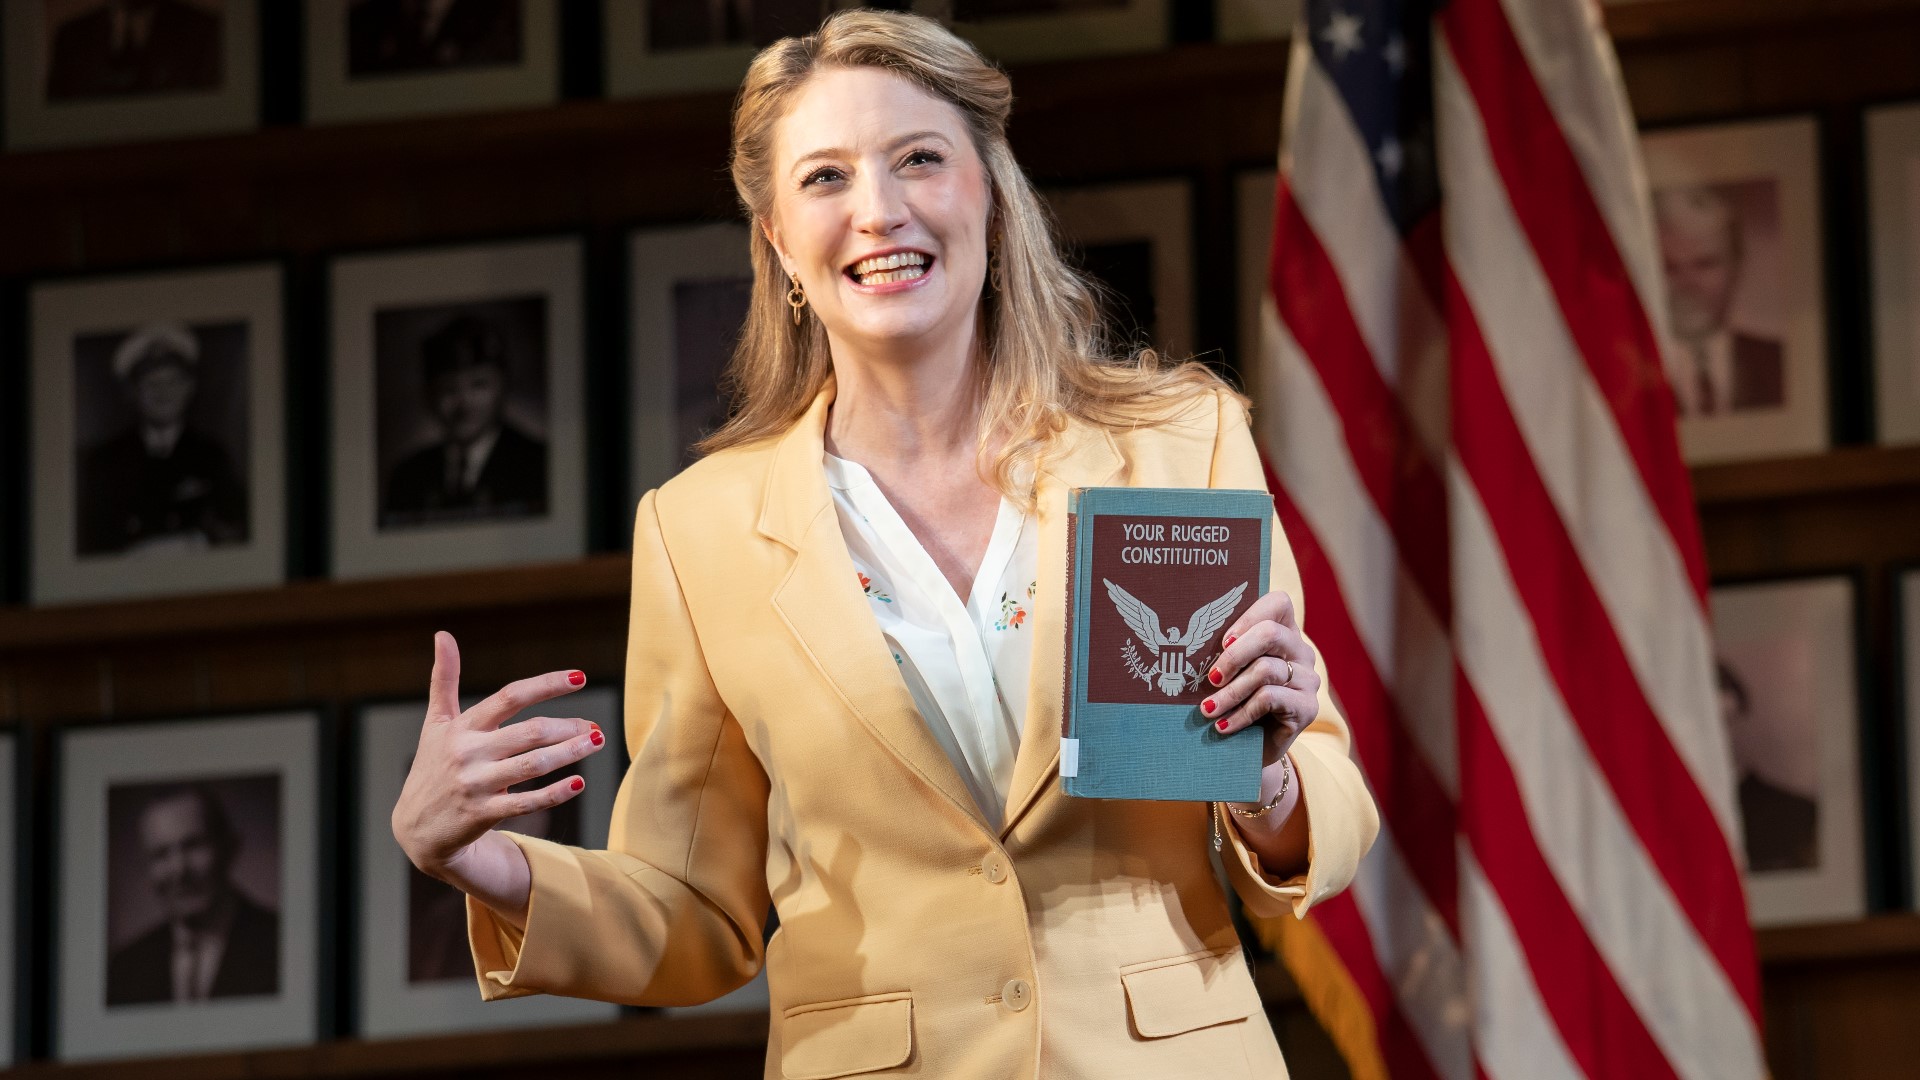 Heidi Schreck's "What the Constitution Means to Me" was inspired by her time as a teenaged debater in Wenatchee. #k5evening